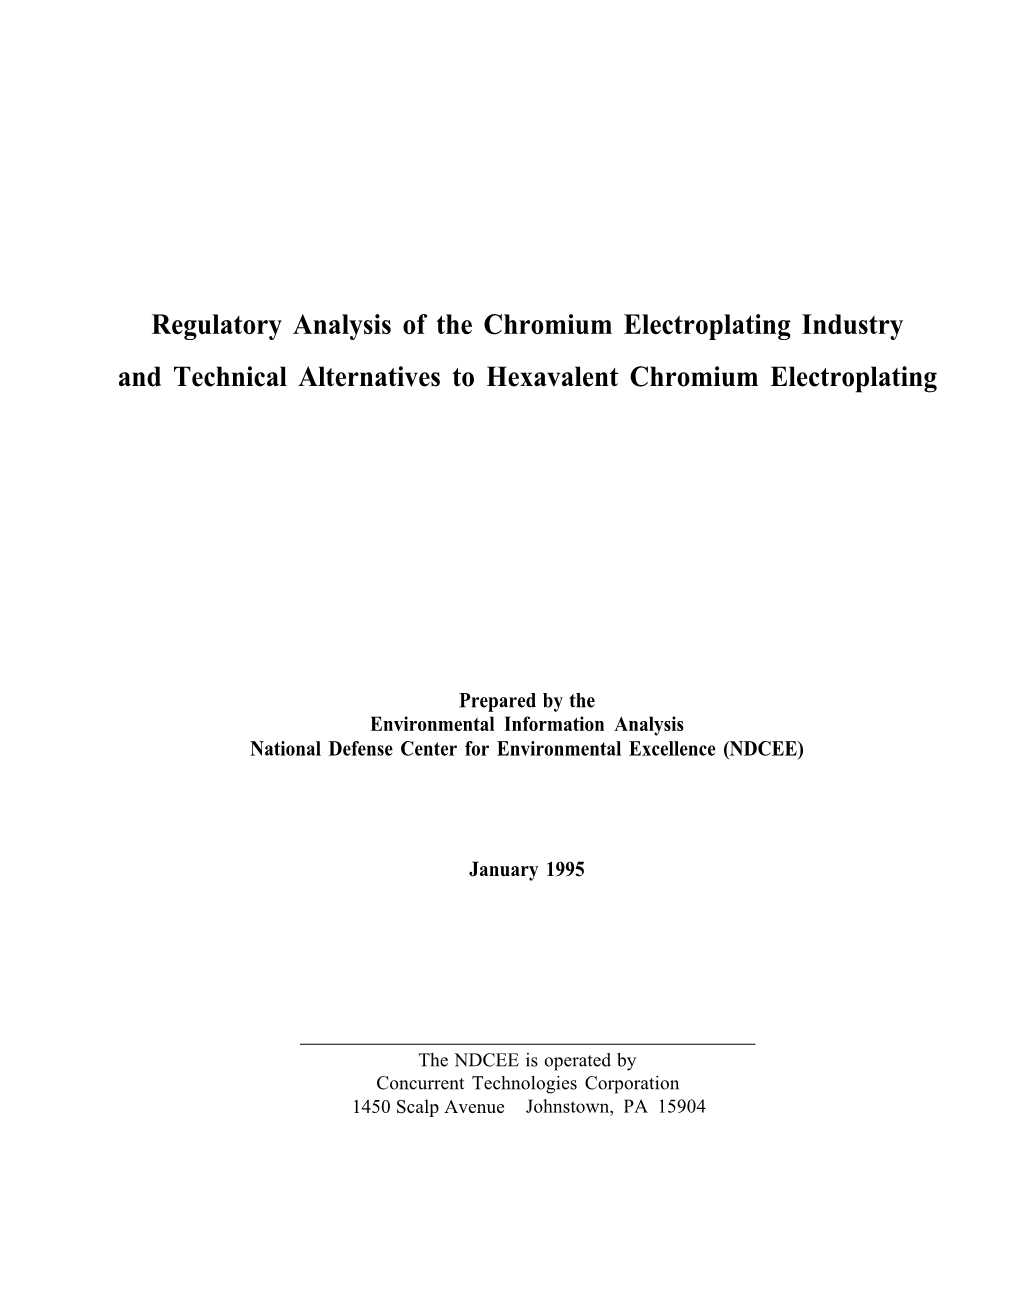 Regulatory Analysis of the Chromium Electroplating Industry and Technical Alternatives to Hexavalent Chromium Electroplating